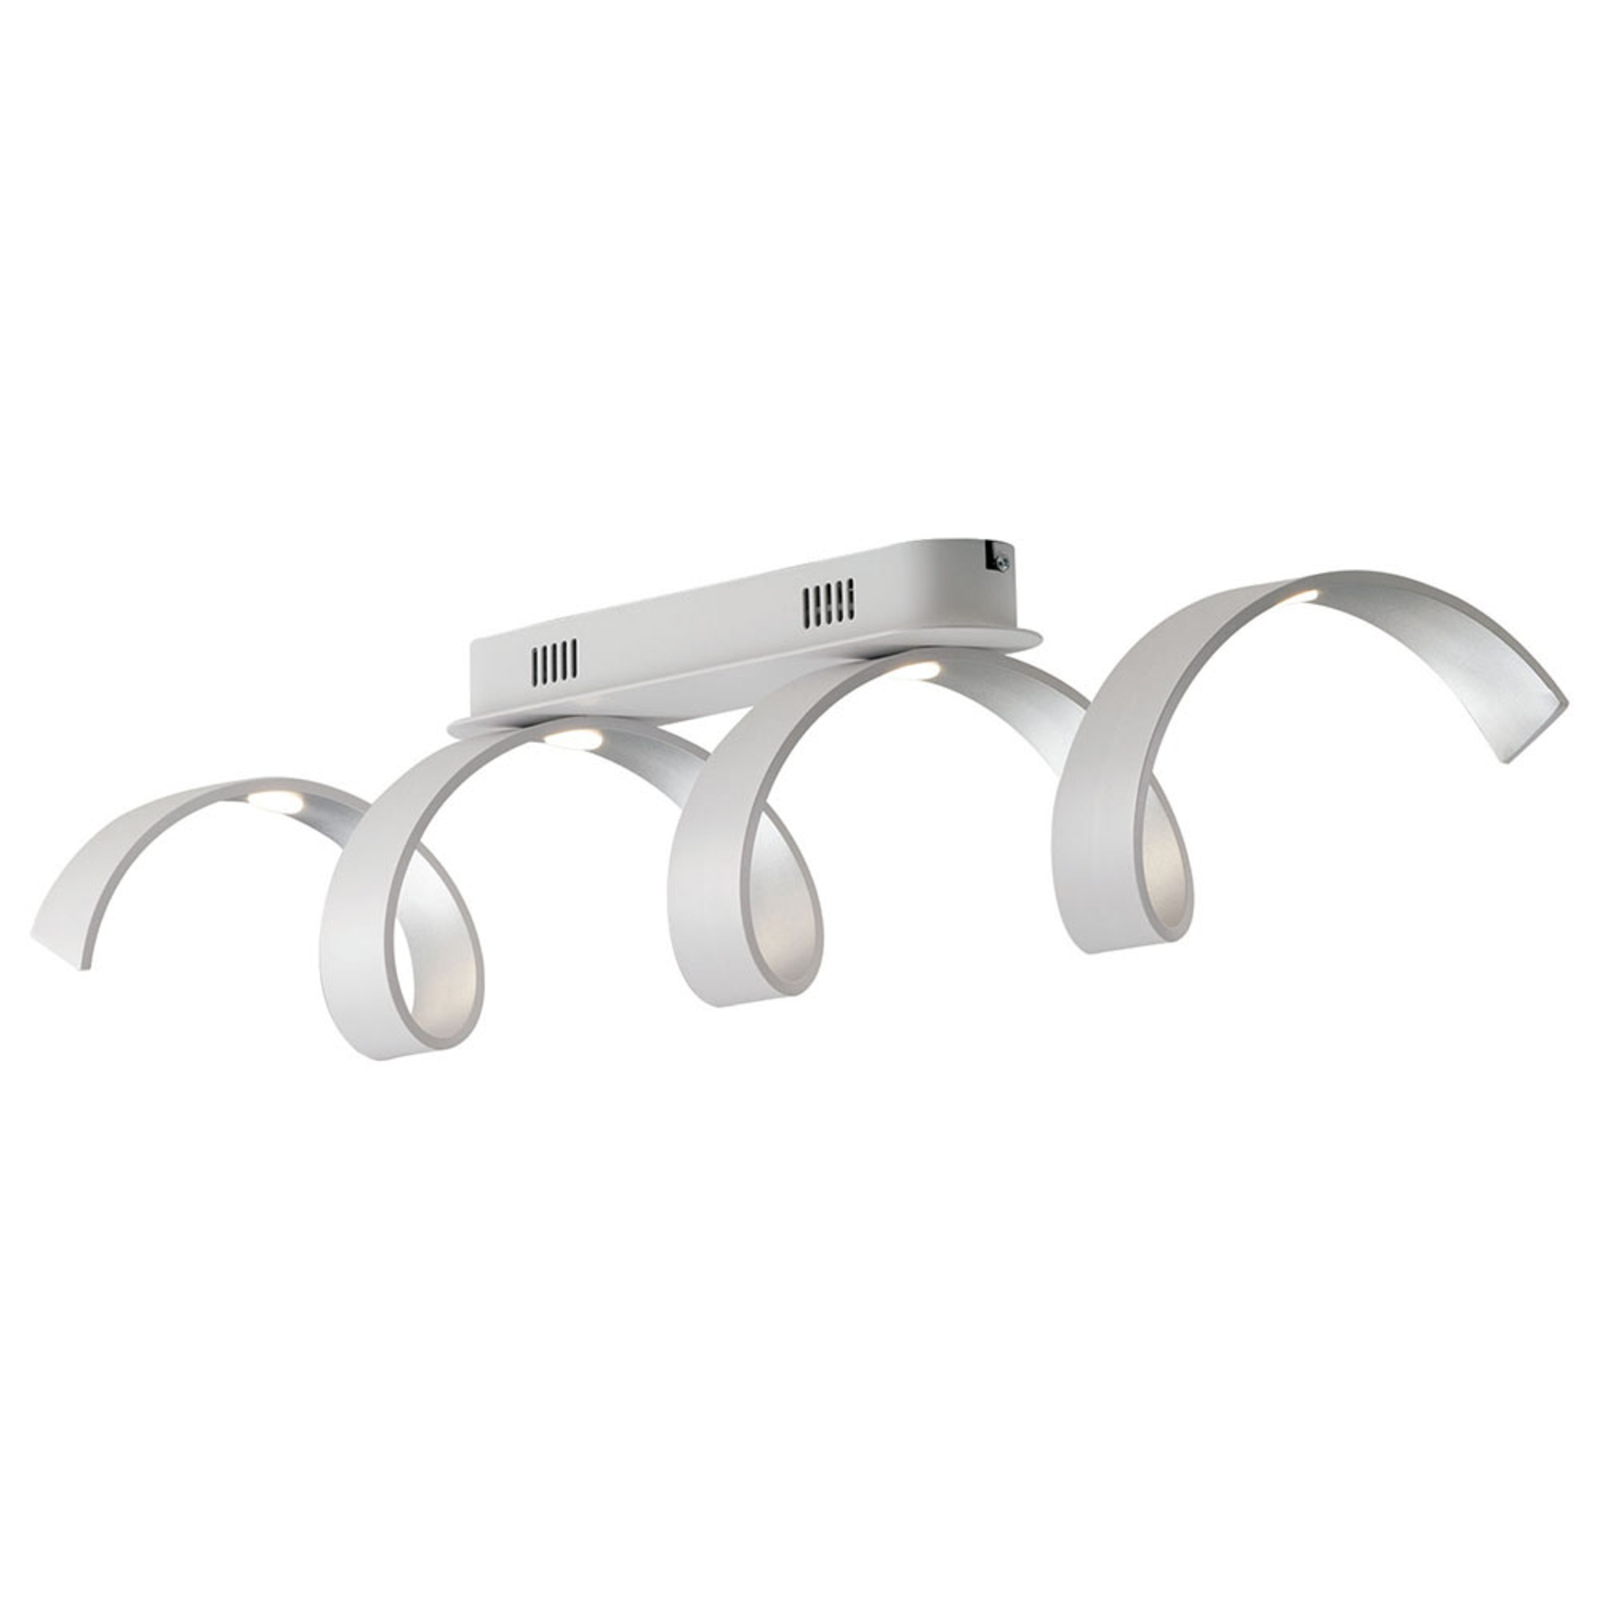 LED plafondlamp Helix in wit-zilver